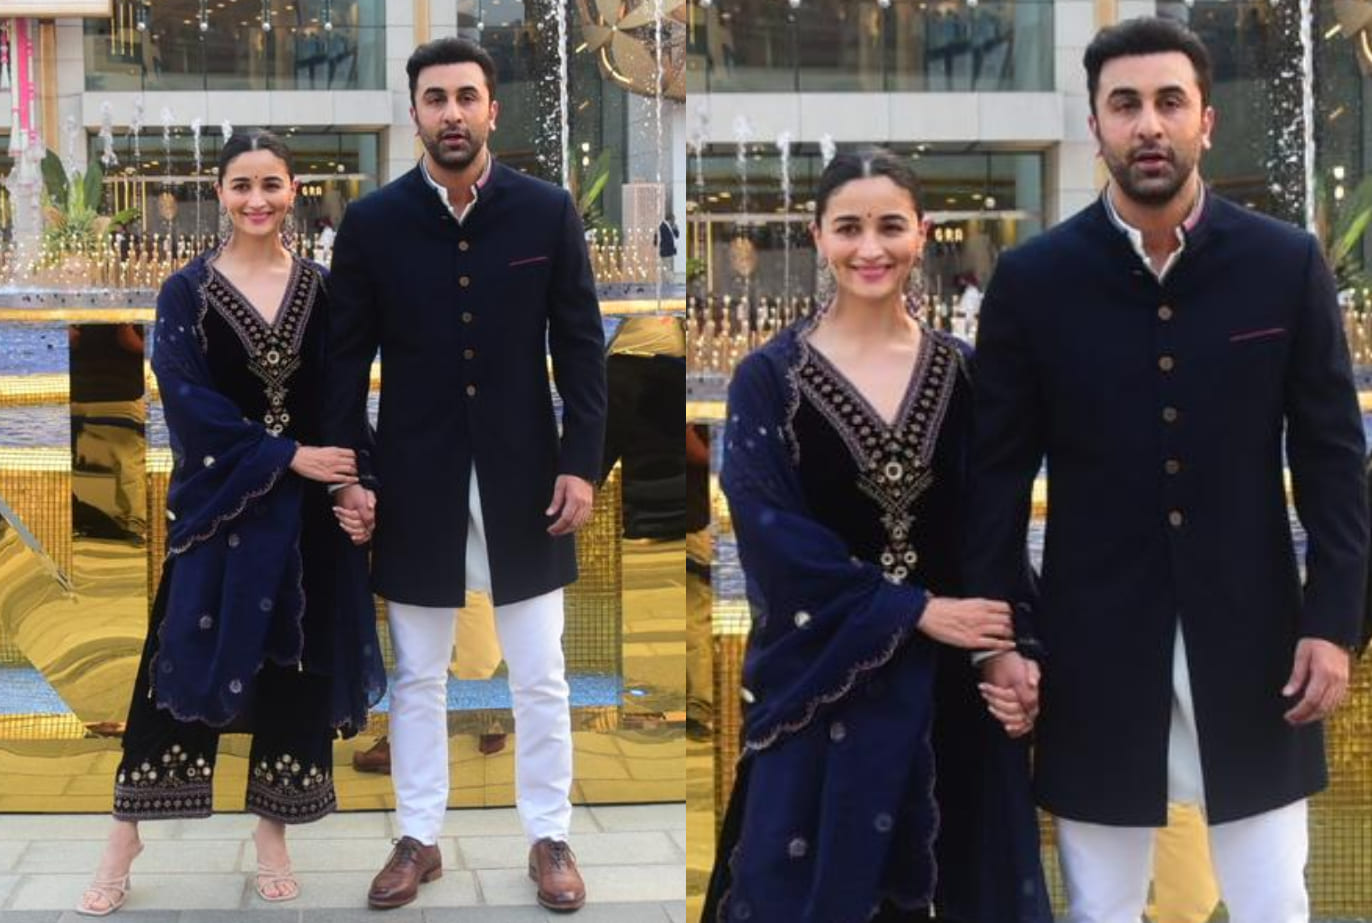 Alia Bhatt and Ranbir Kapoor attended the opening ceremony of 141st International Olympic committee session